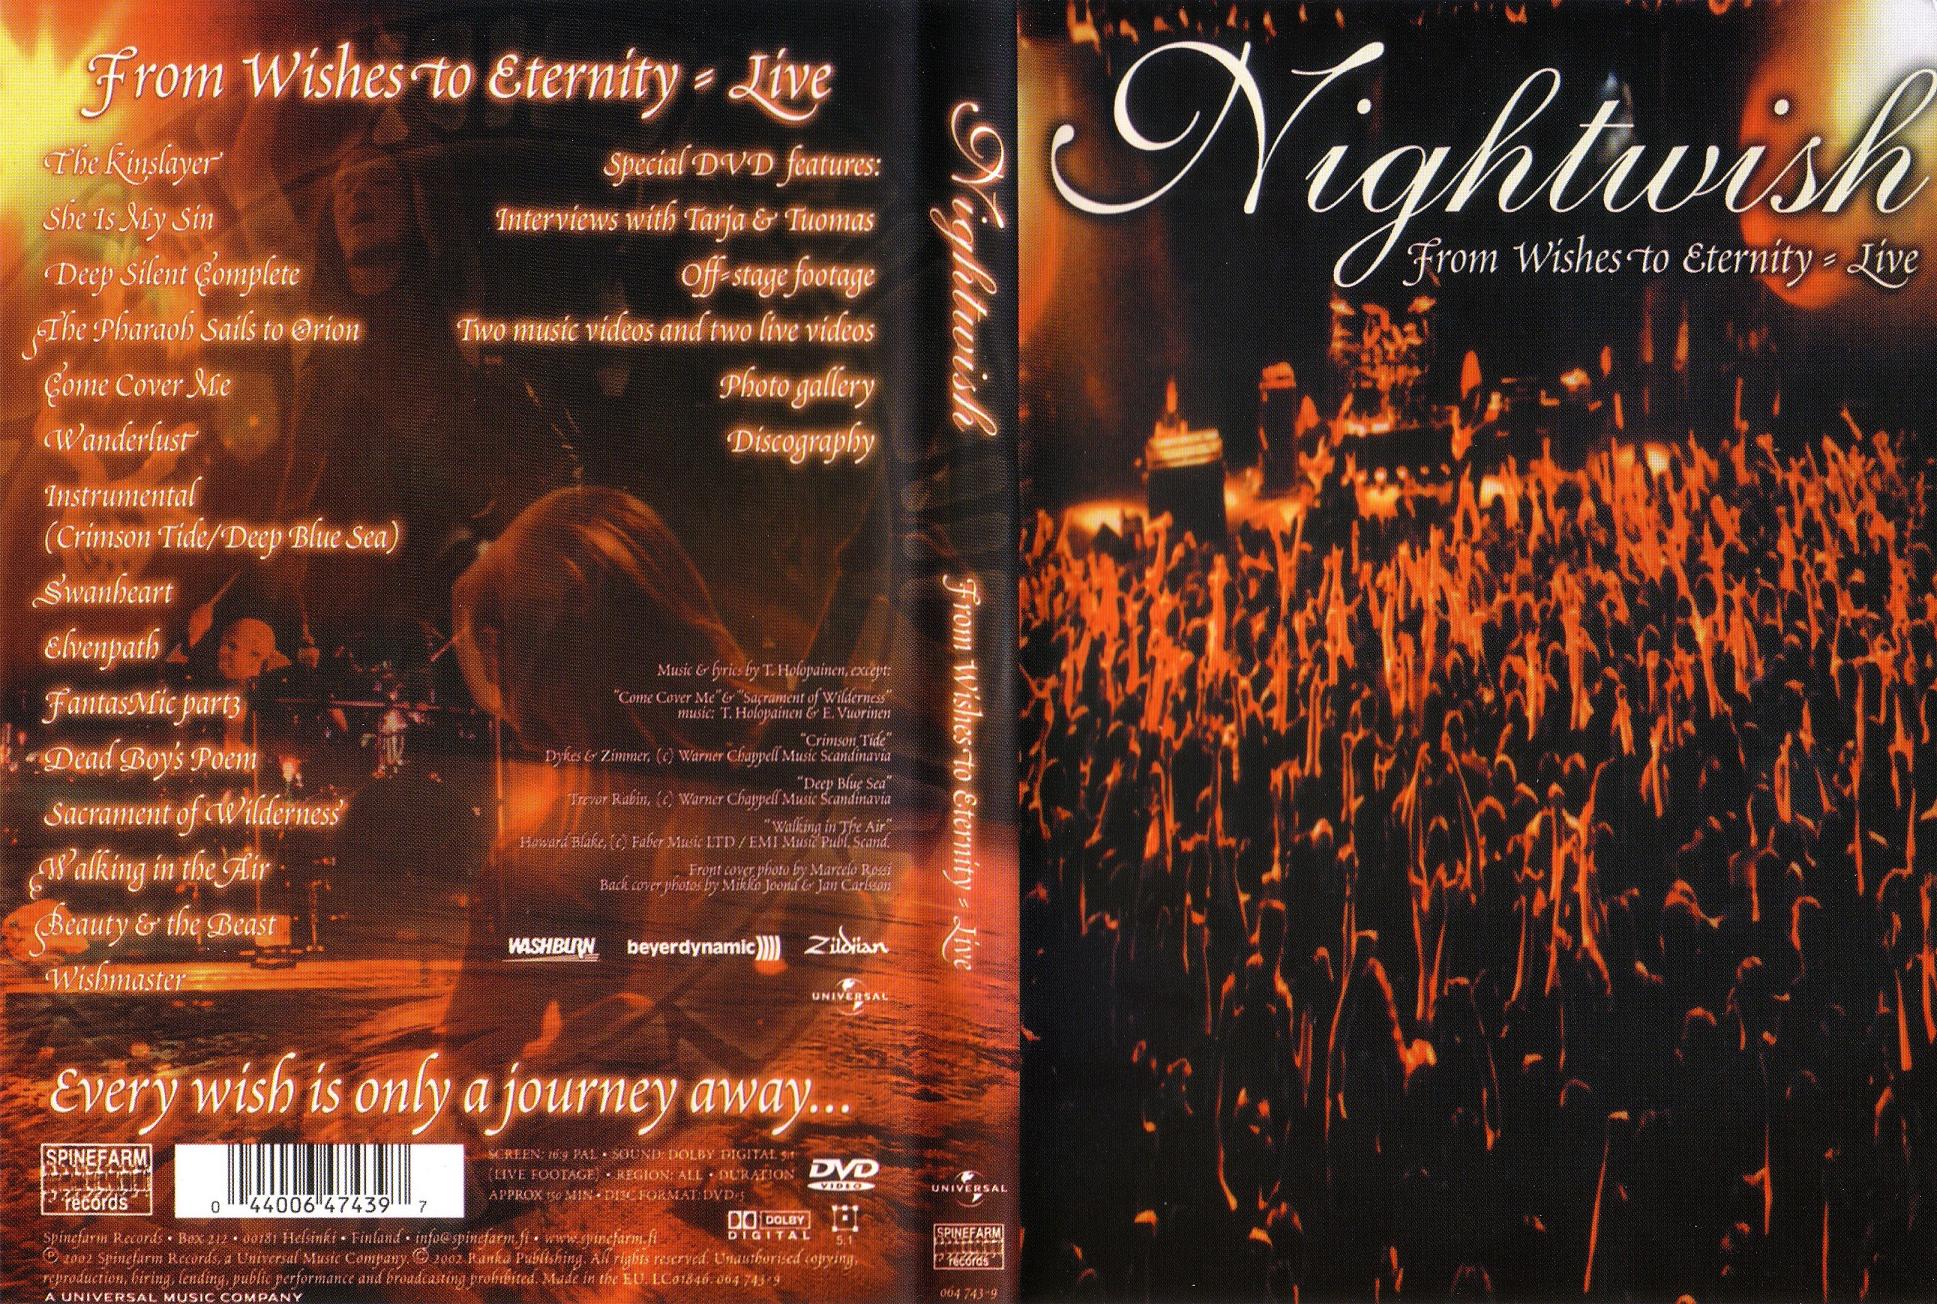 Jaquette DVD Nightwish From wishes to Eternity